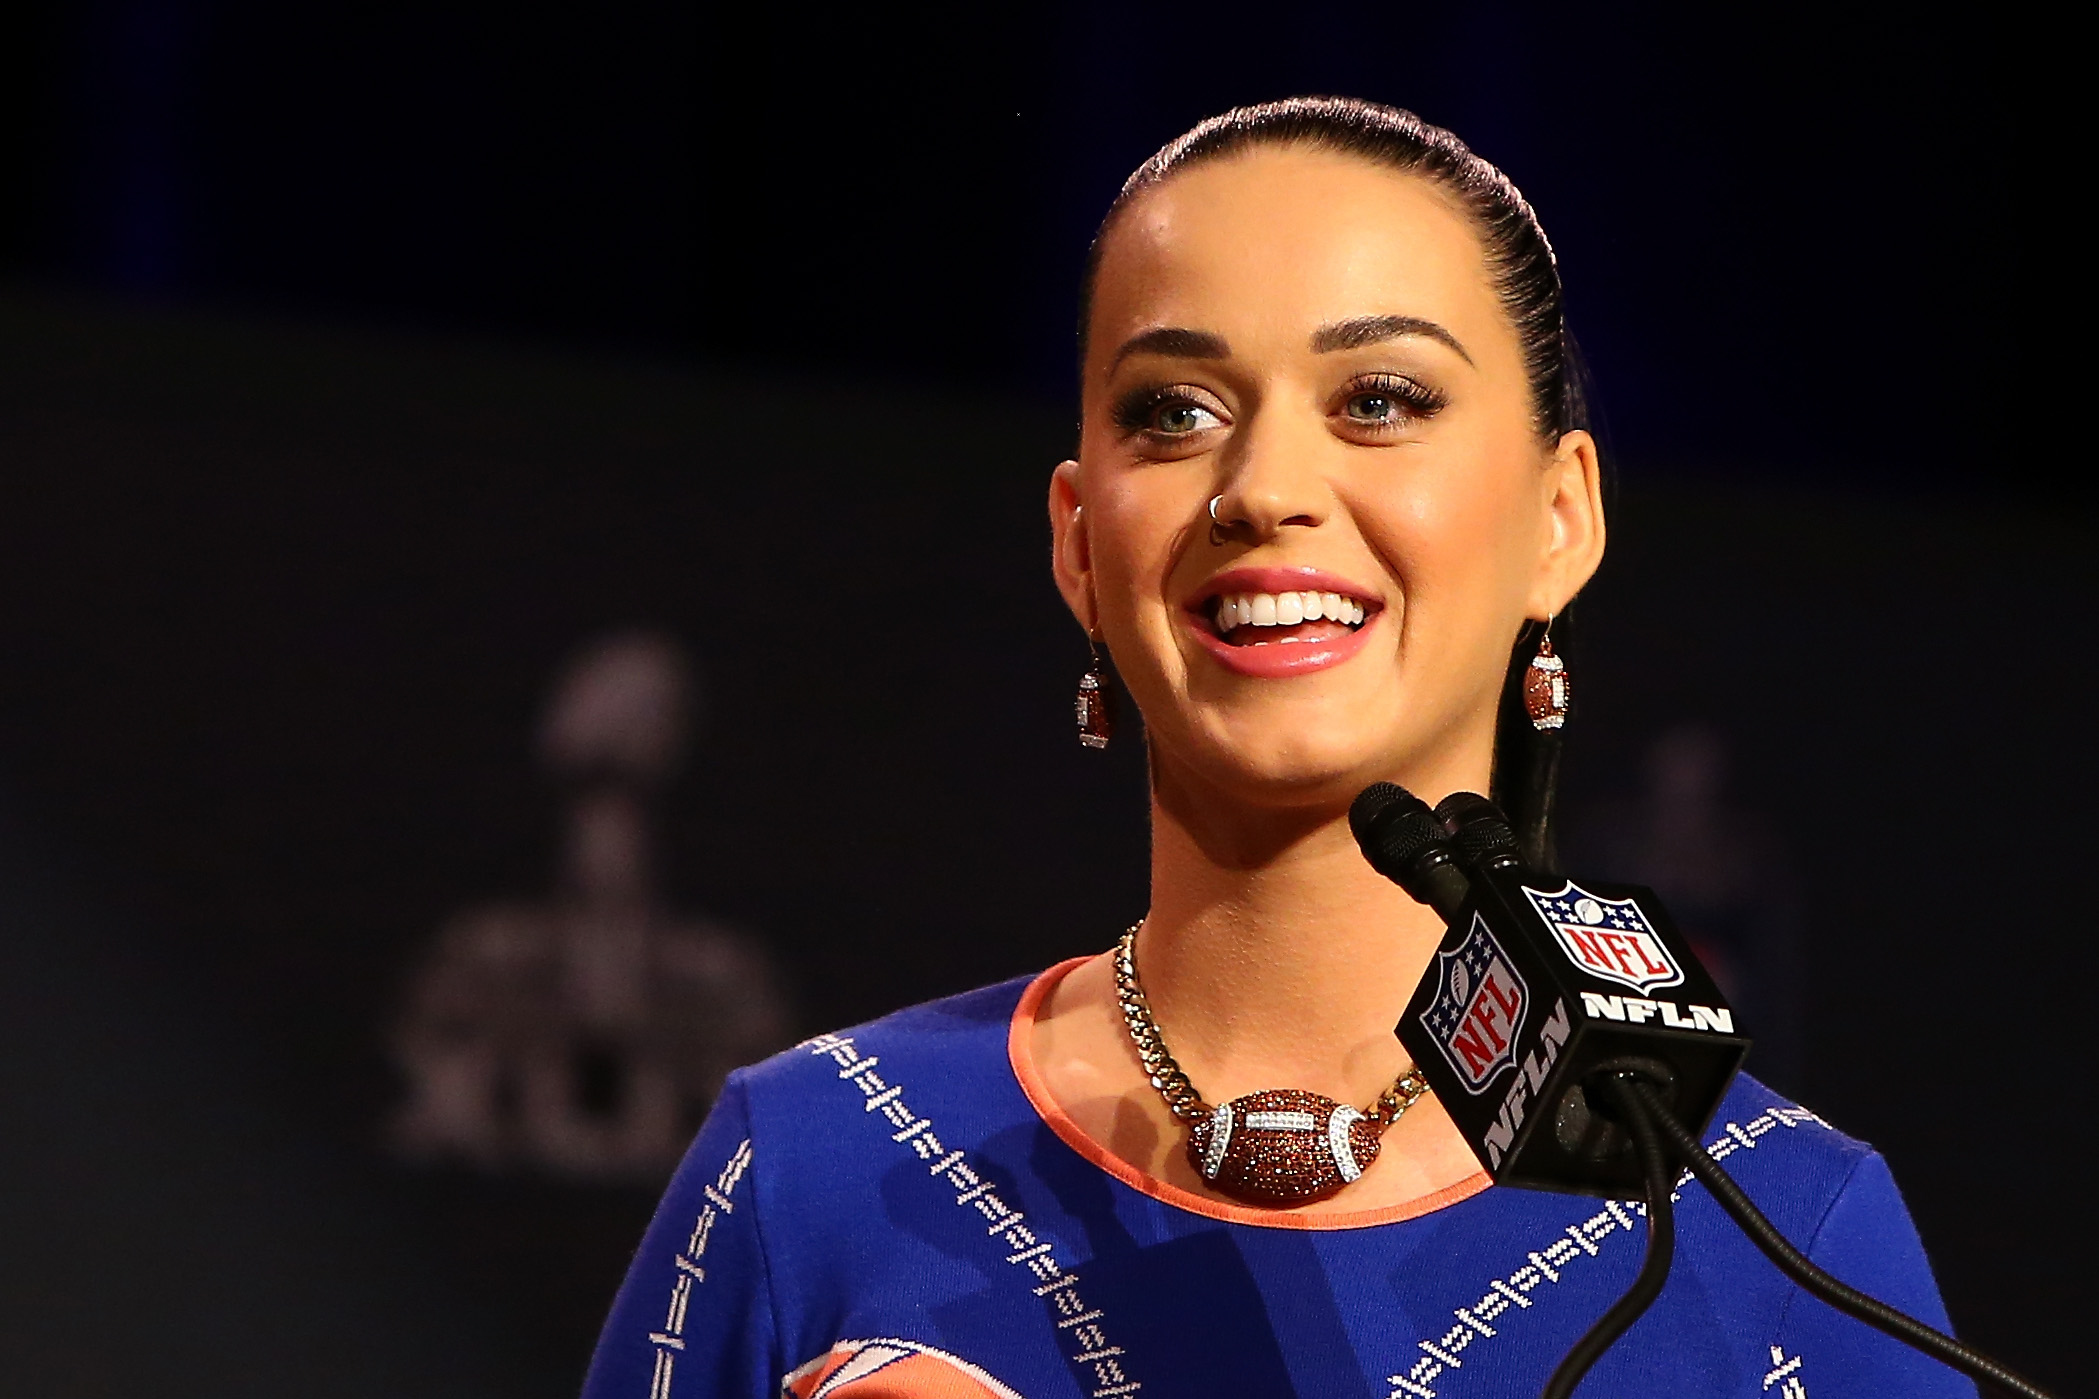 Katy Perry at the Pepsi Super Bowl XLIX Halftime Show Press Conference  in Phoenix on Jan. 29, 2015 (Mike Lawrie—Getty Images)